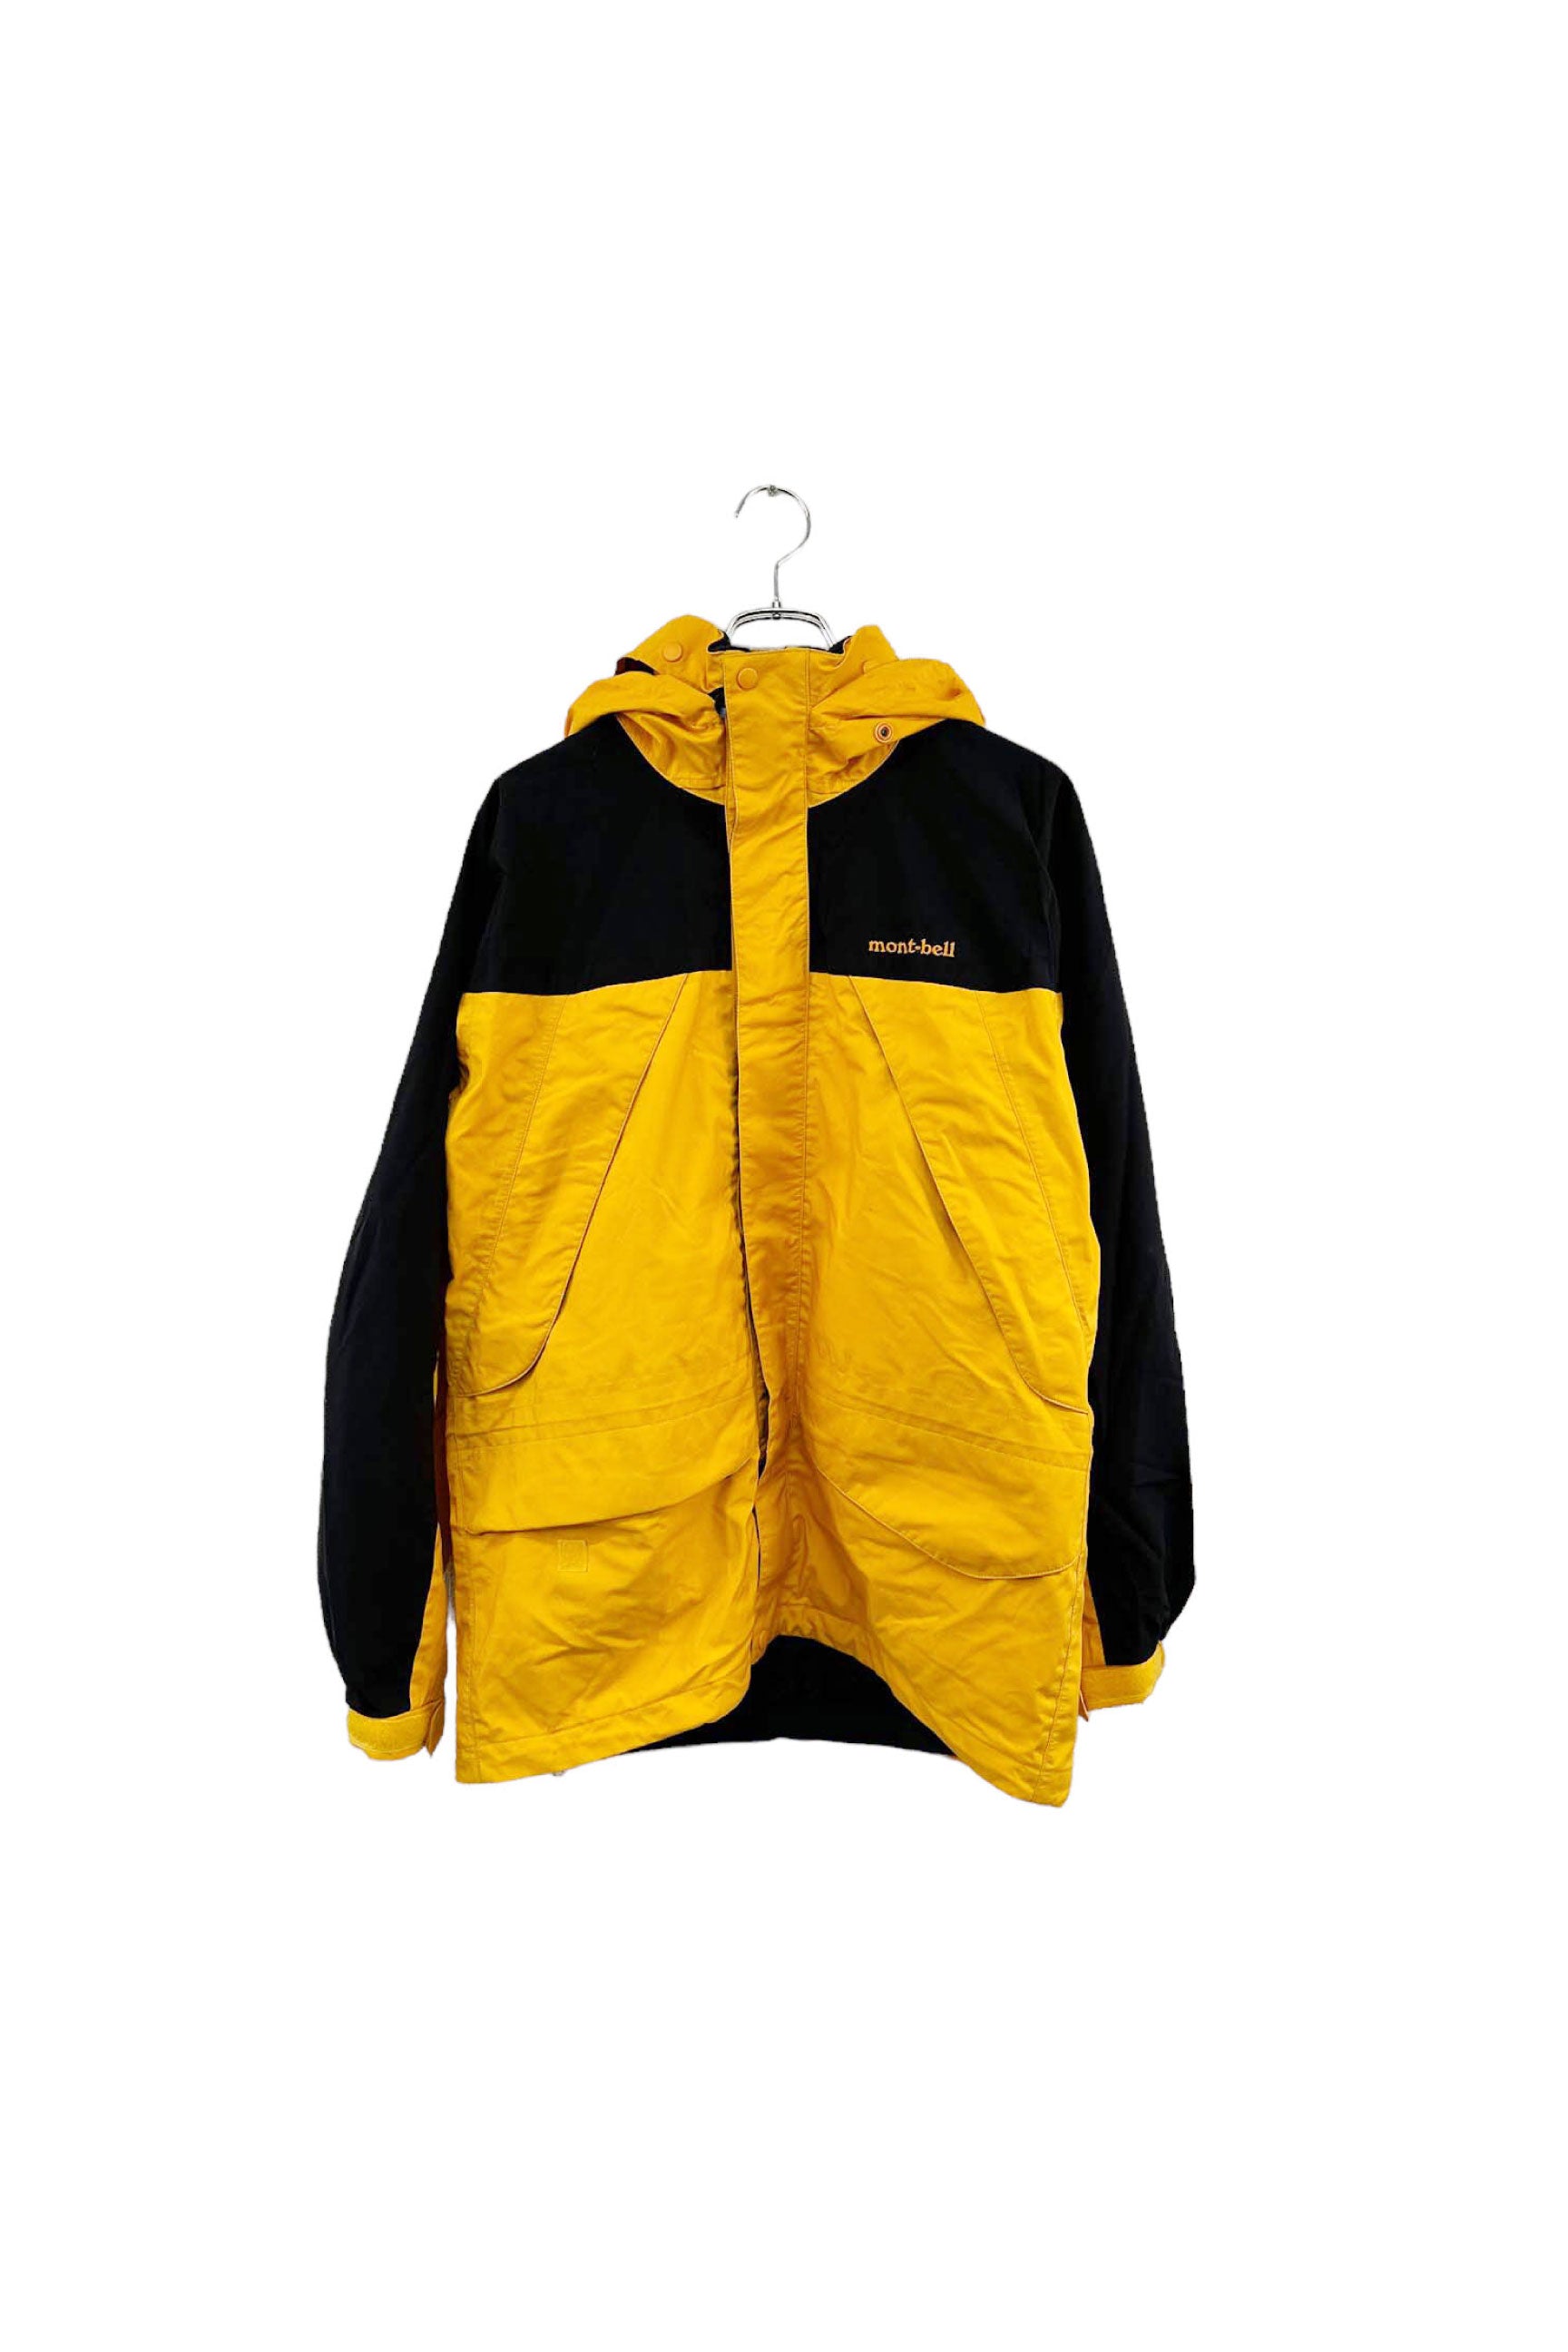 [00s/Y2K] mont-bell mountain jacket